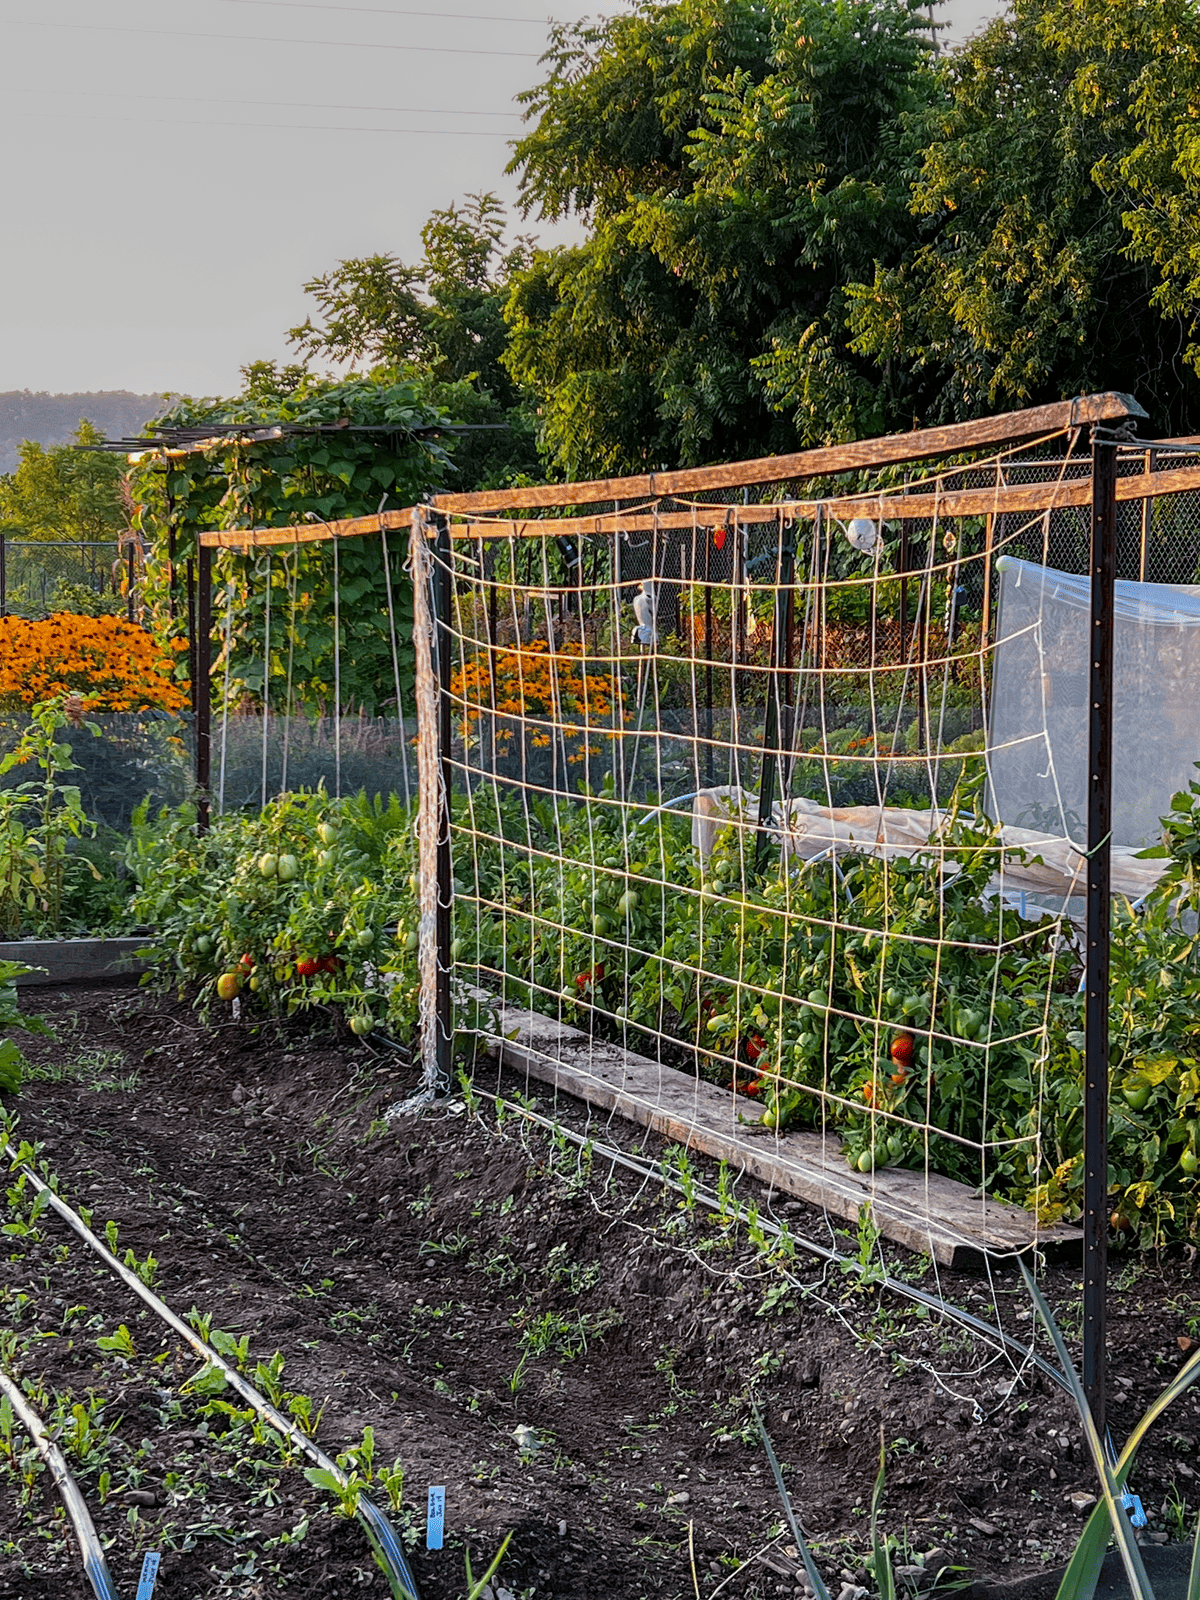 Trellis netting with poles in garden for peas to climb on.